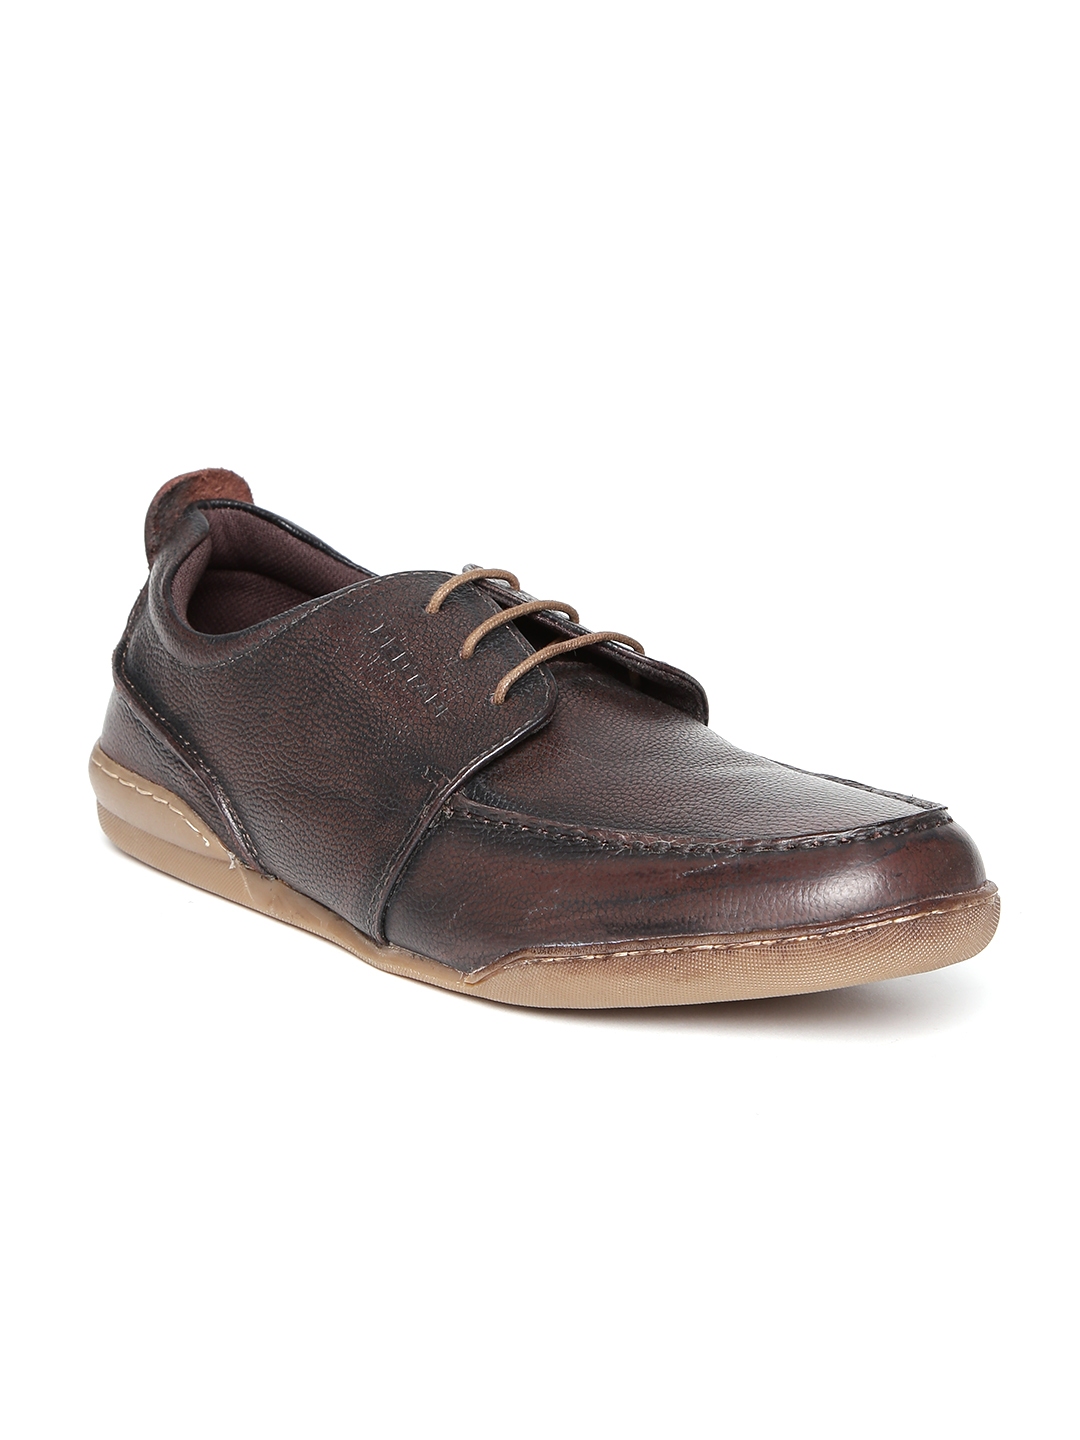 red tape dark tan derby shoes